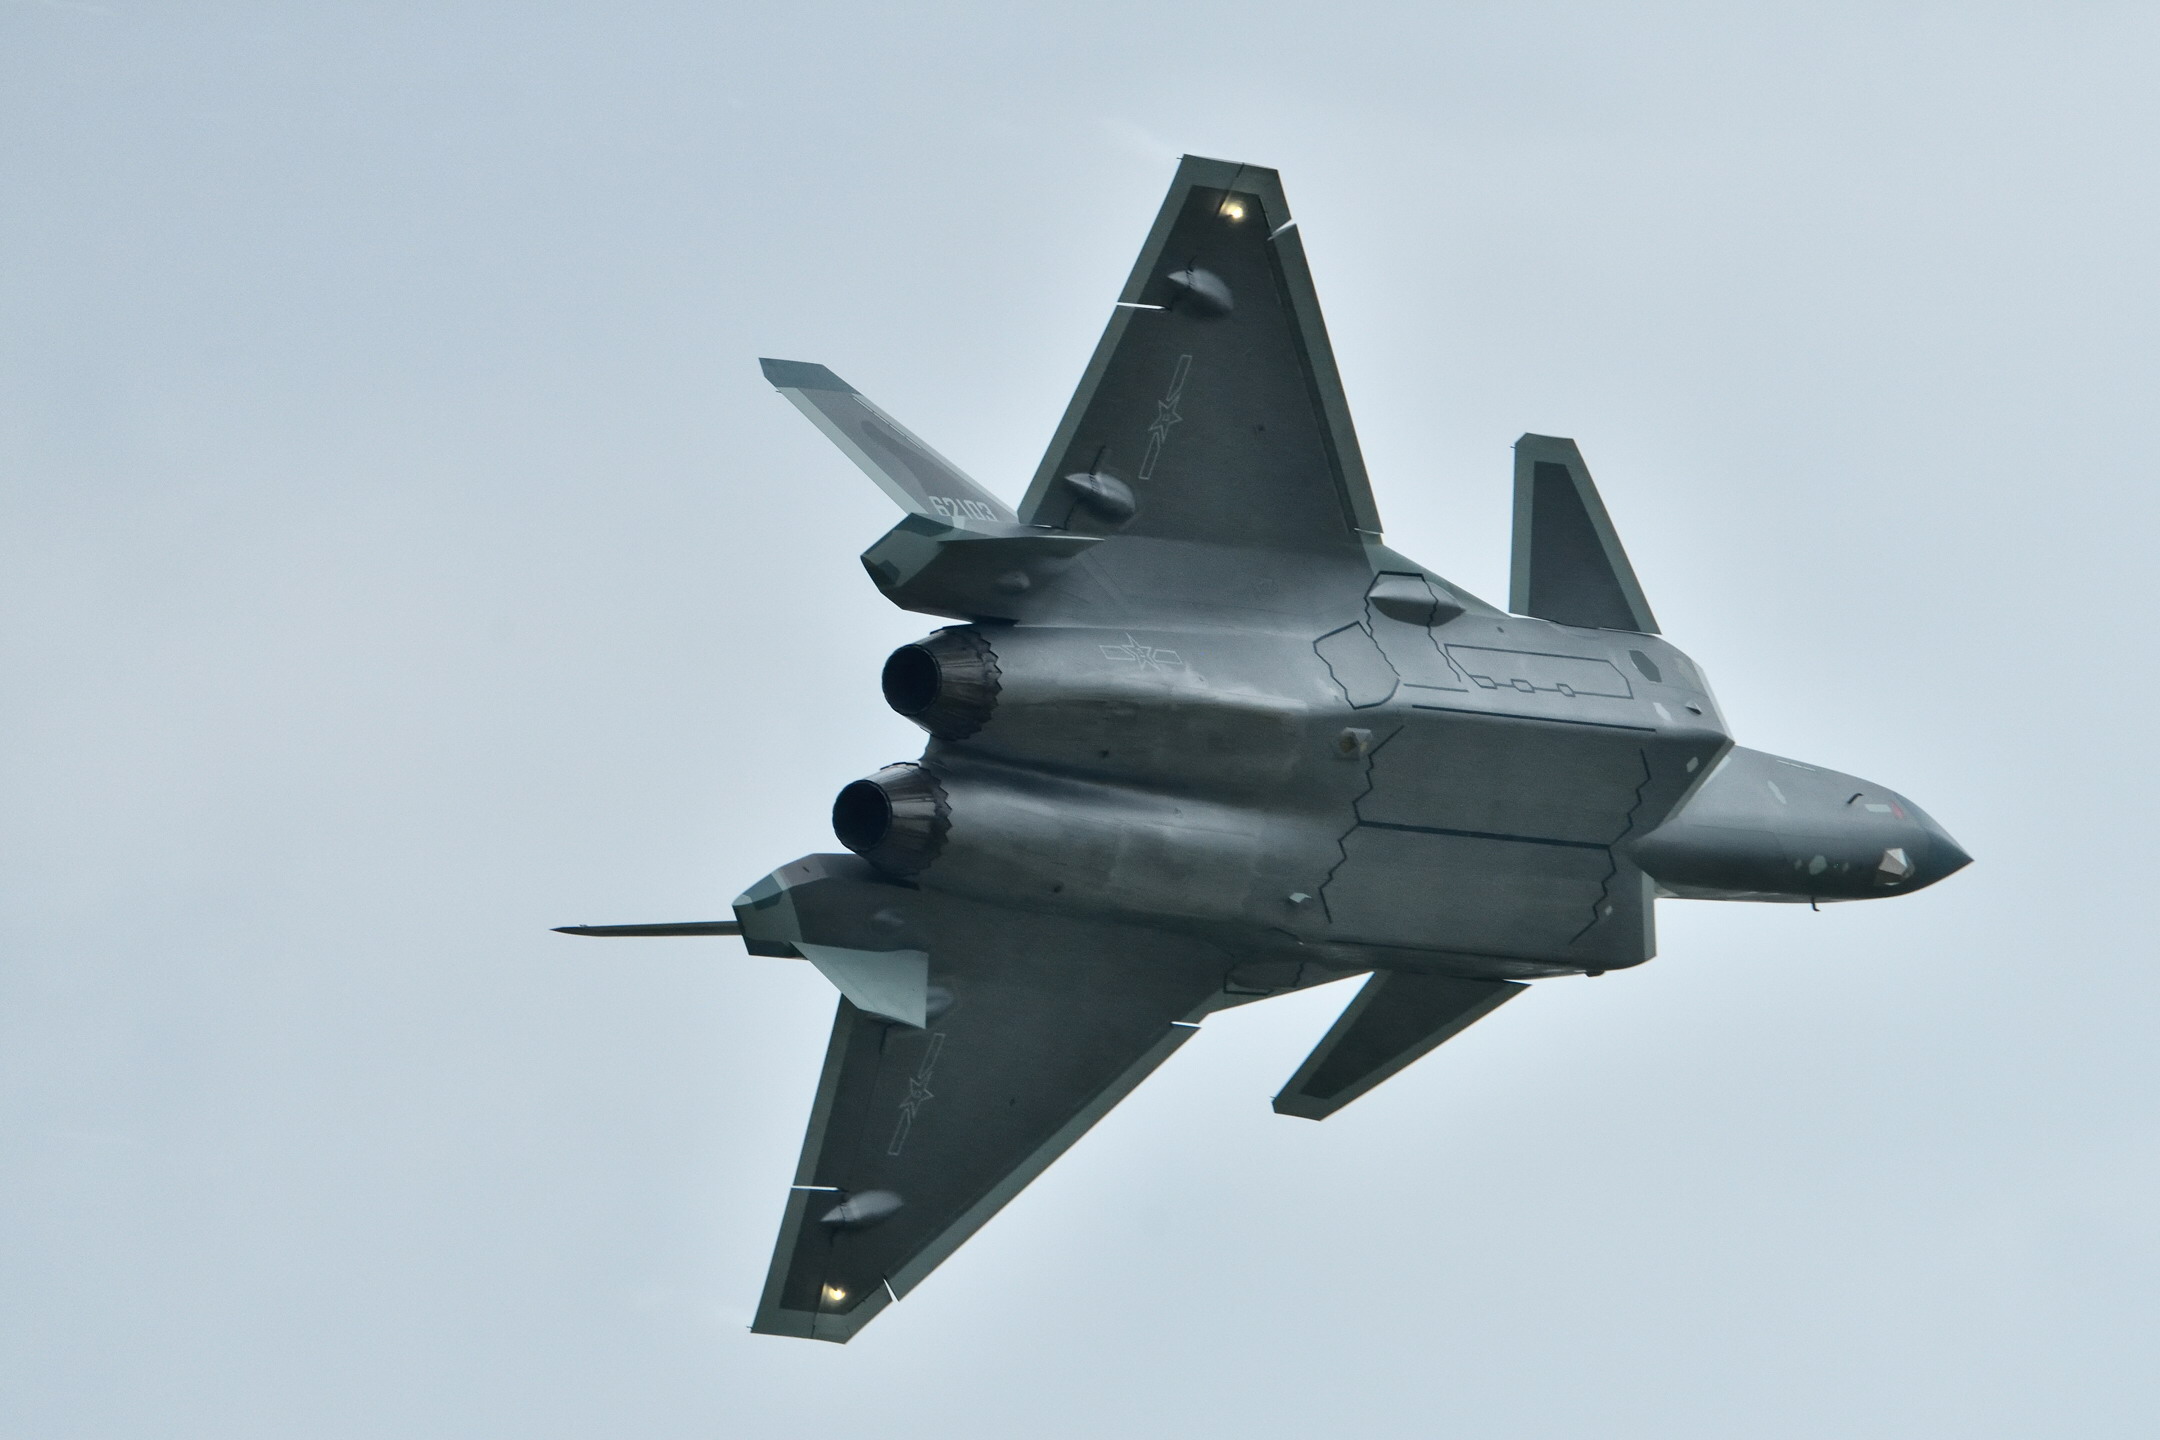 General 2160x1440 Chengdu J-20 PLAAF simple background minimalism aircraft flying sky military military aircraft